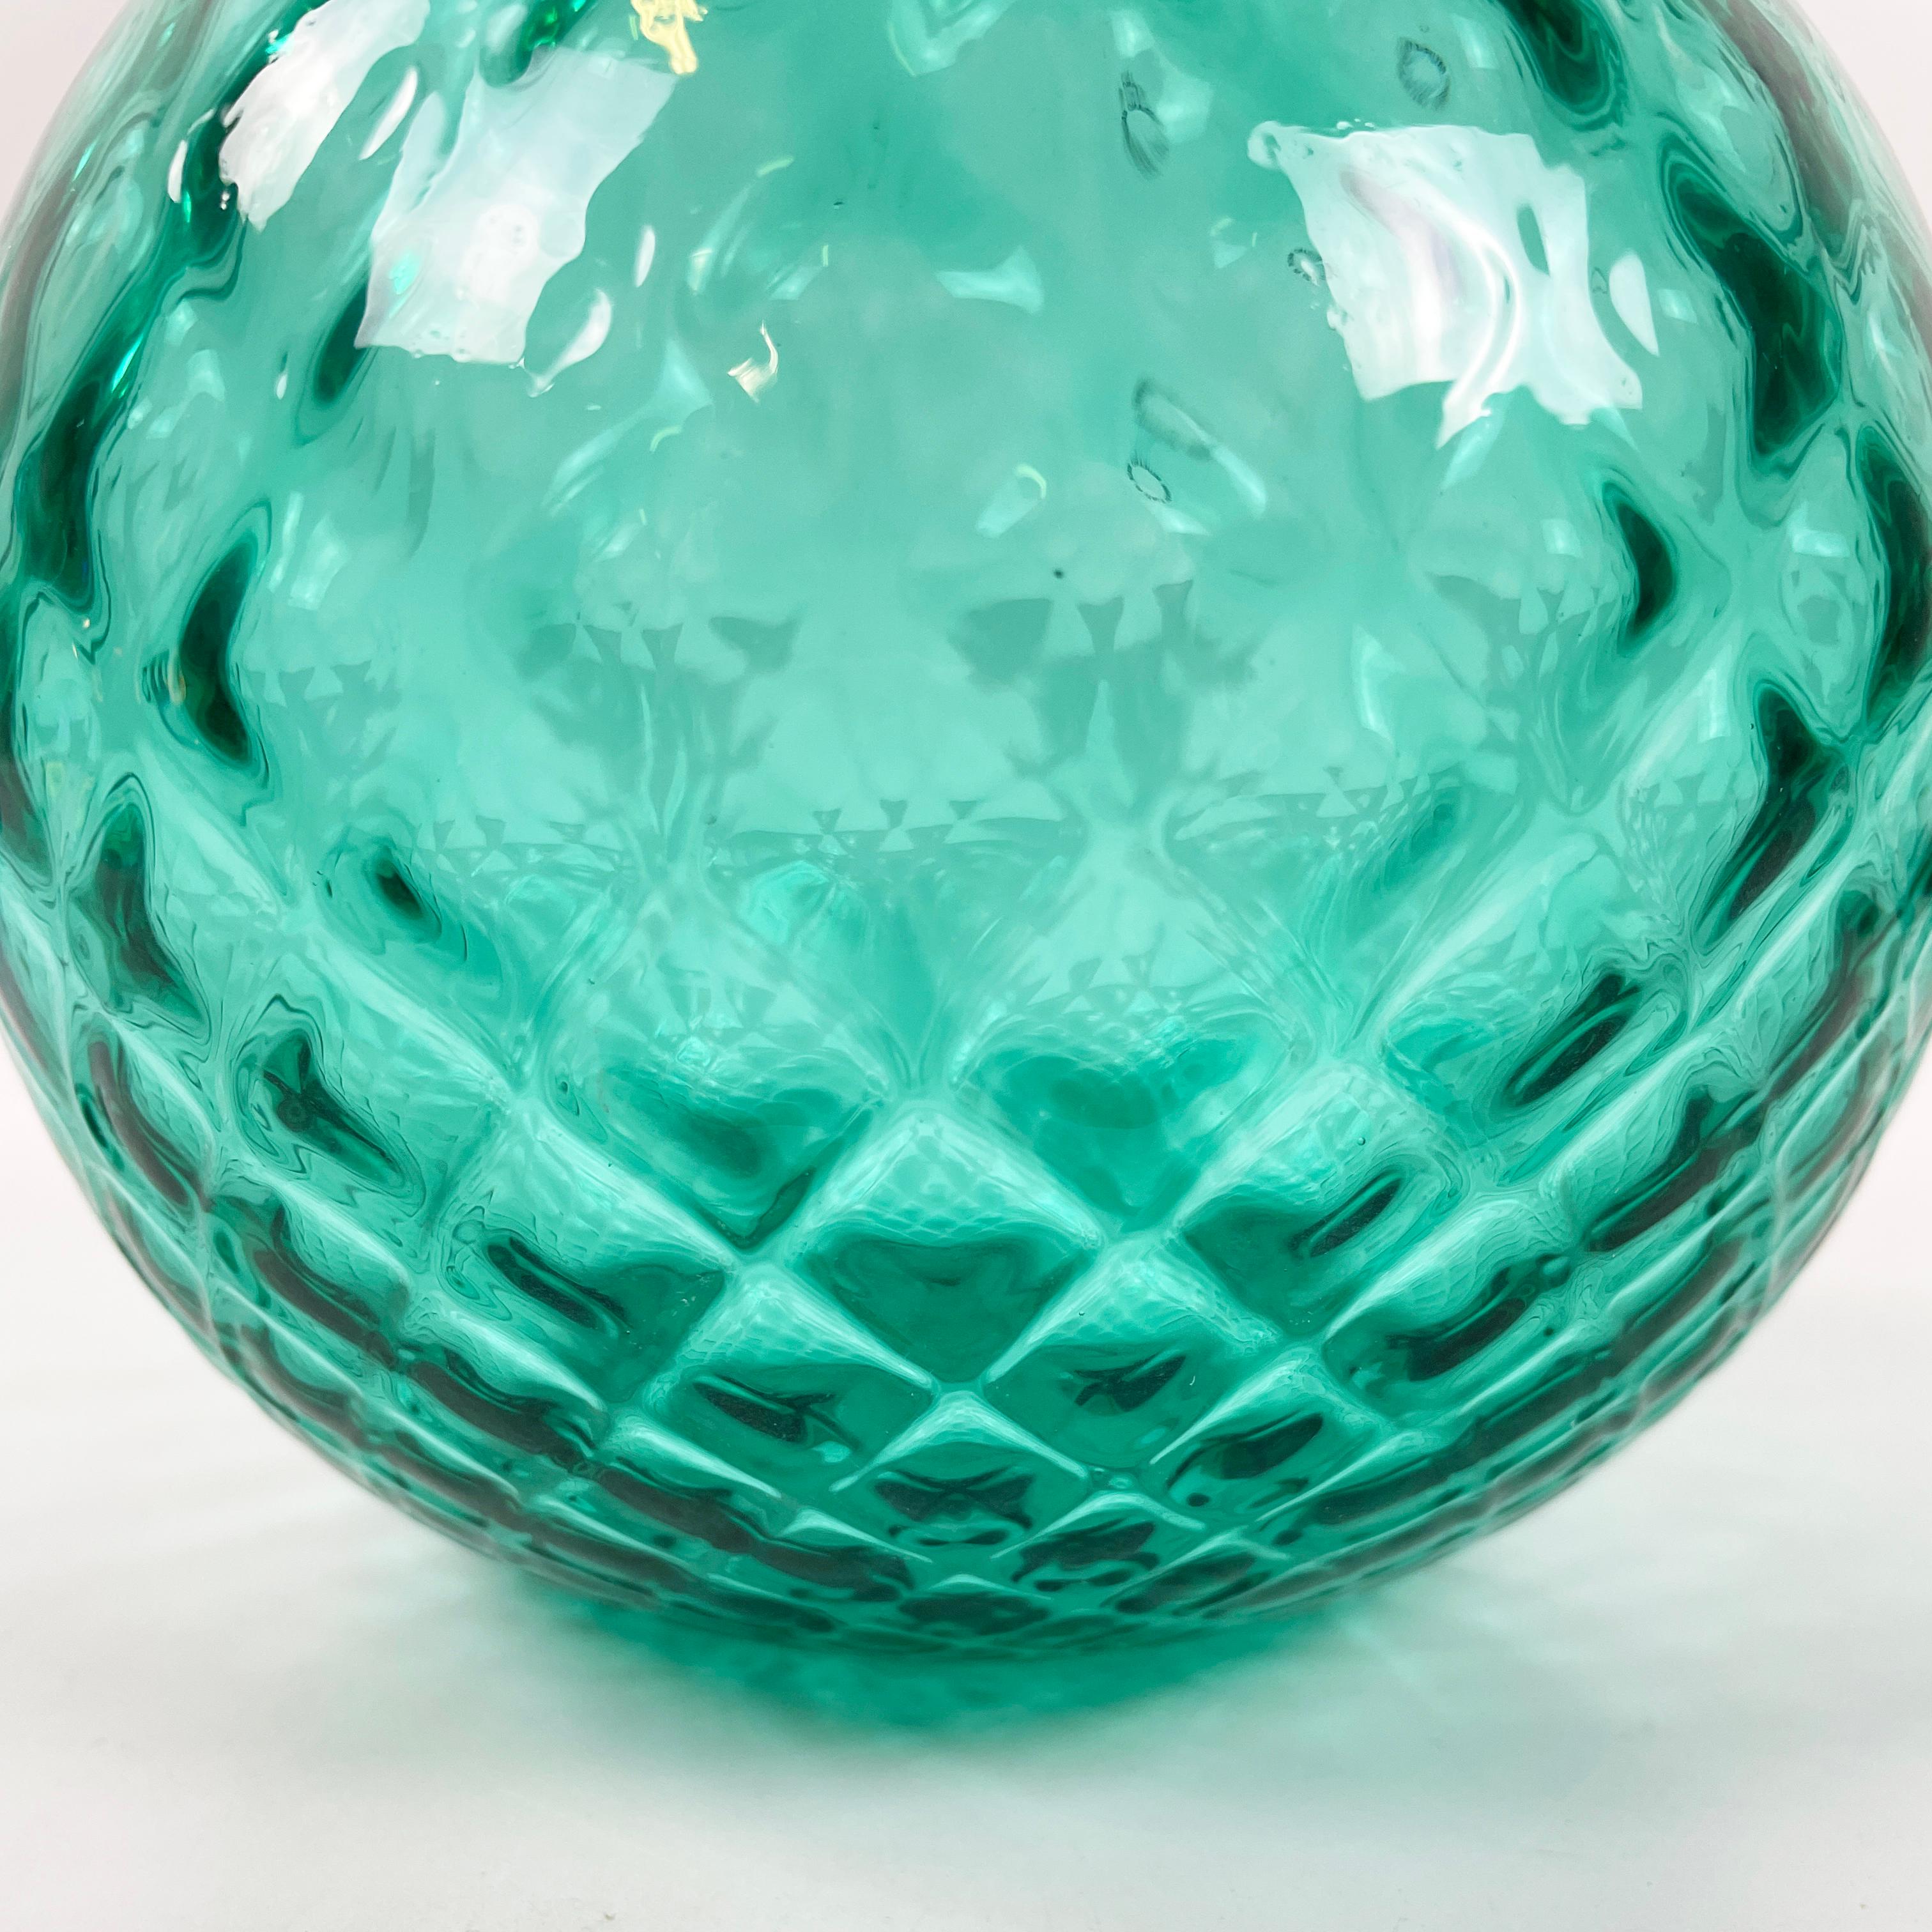 Italian modern round vase in green and white Murano glass by Venini 1990s For Sale 3